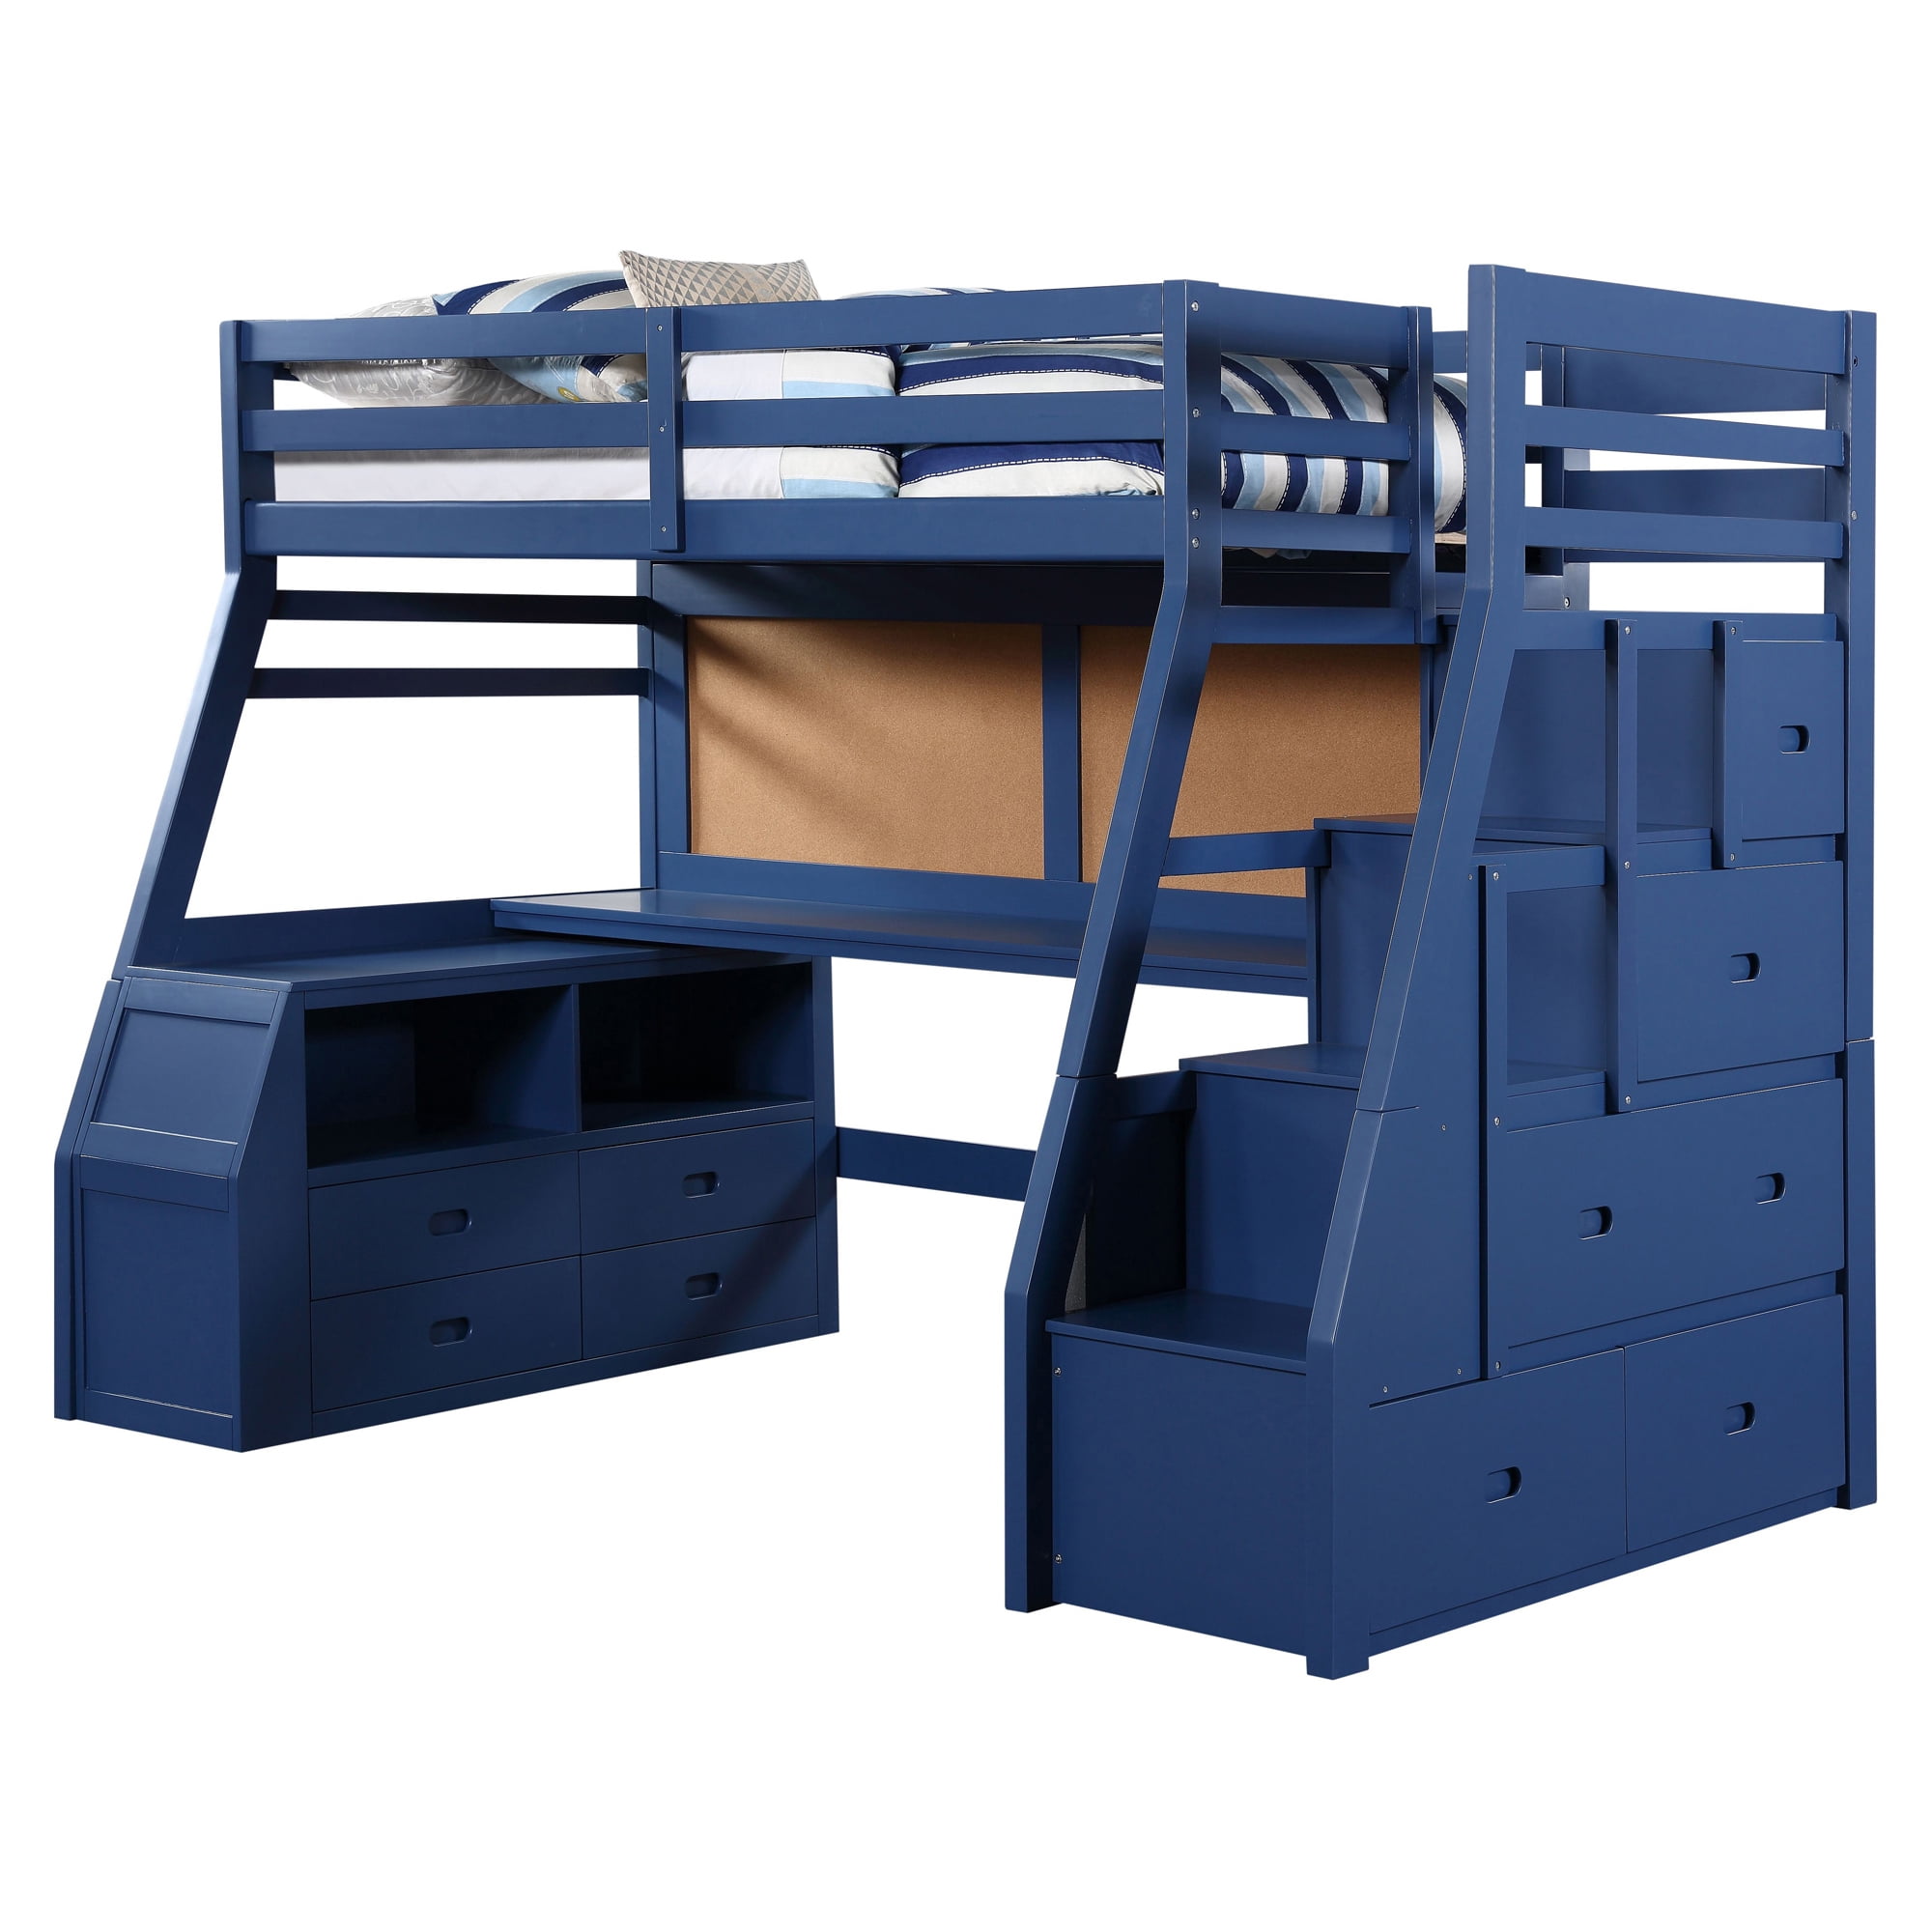 Picture of Acme Furniture 37455 98 x 57 x 73 in. Jason II Storage Loft Bed, Navy Blue - Twin Size - Case of 4